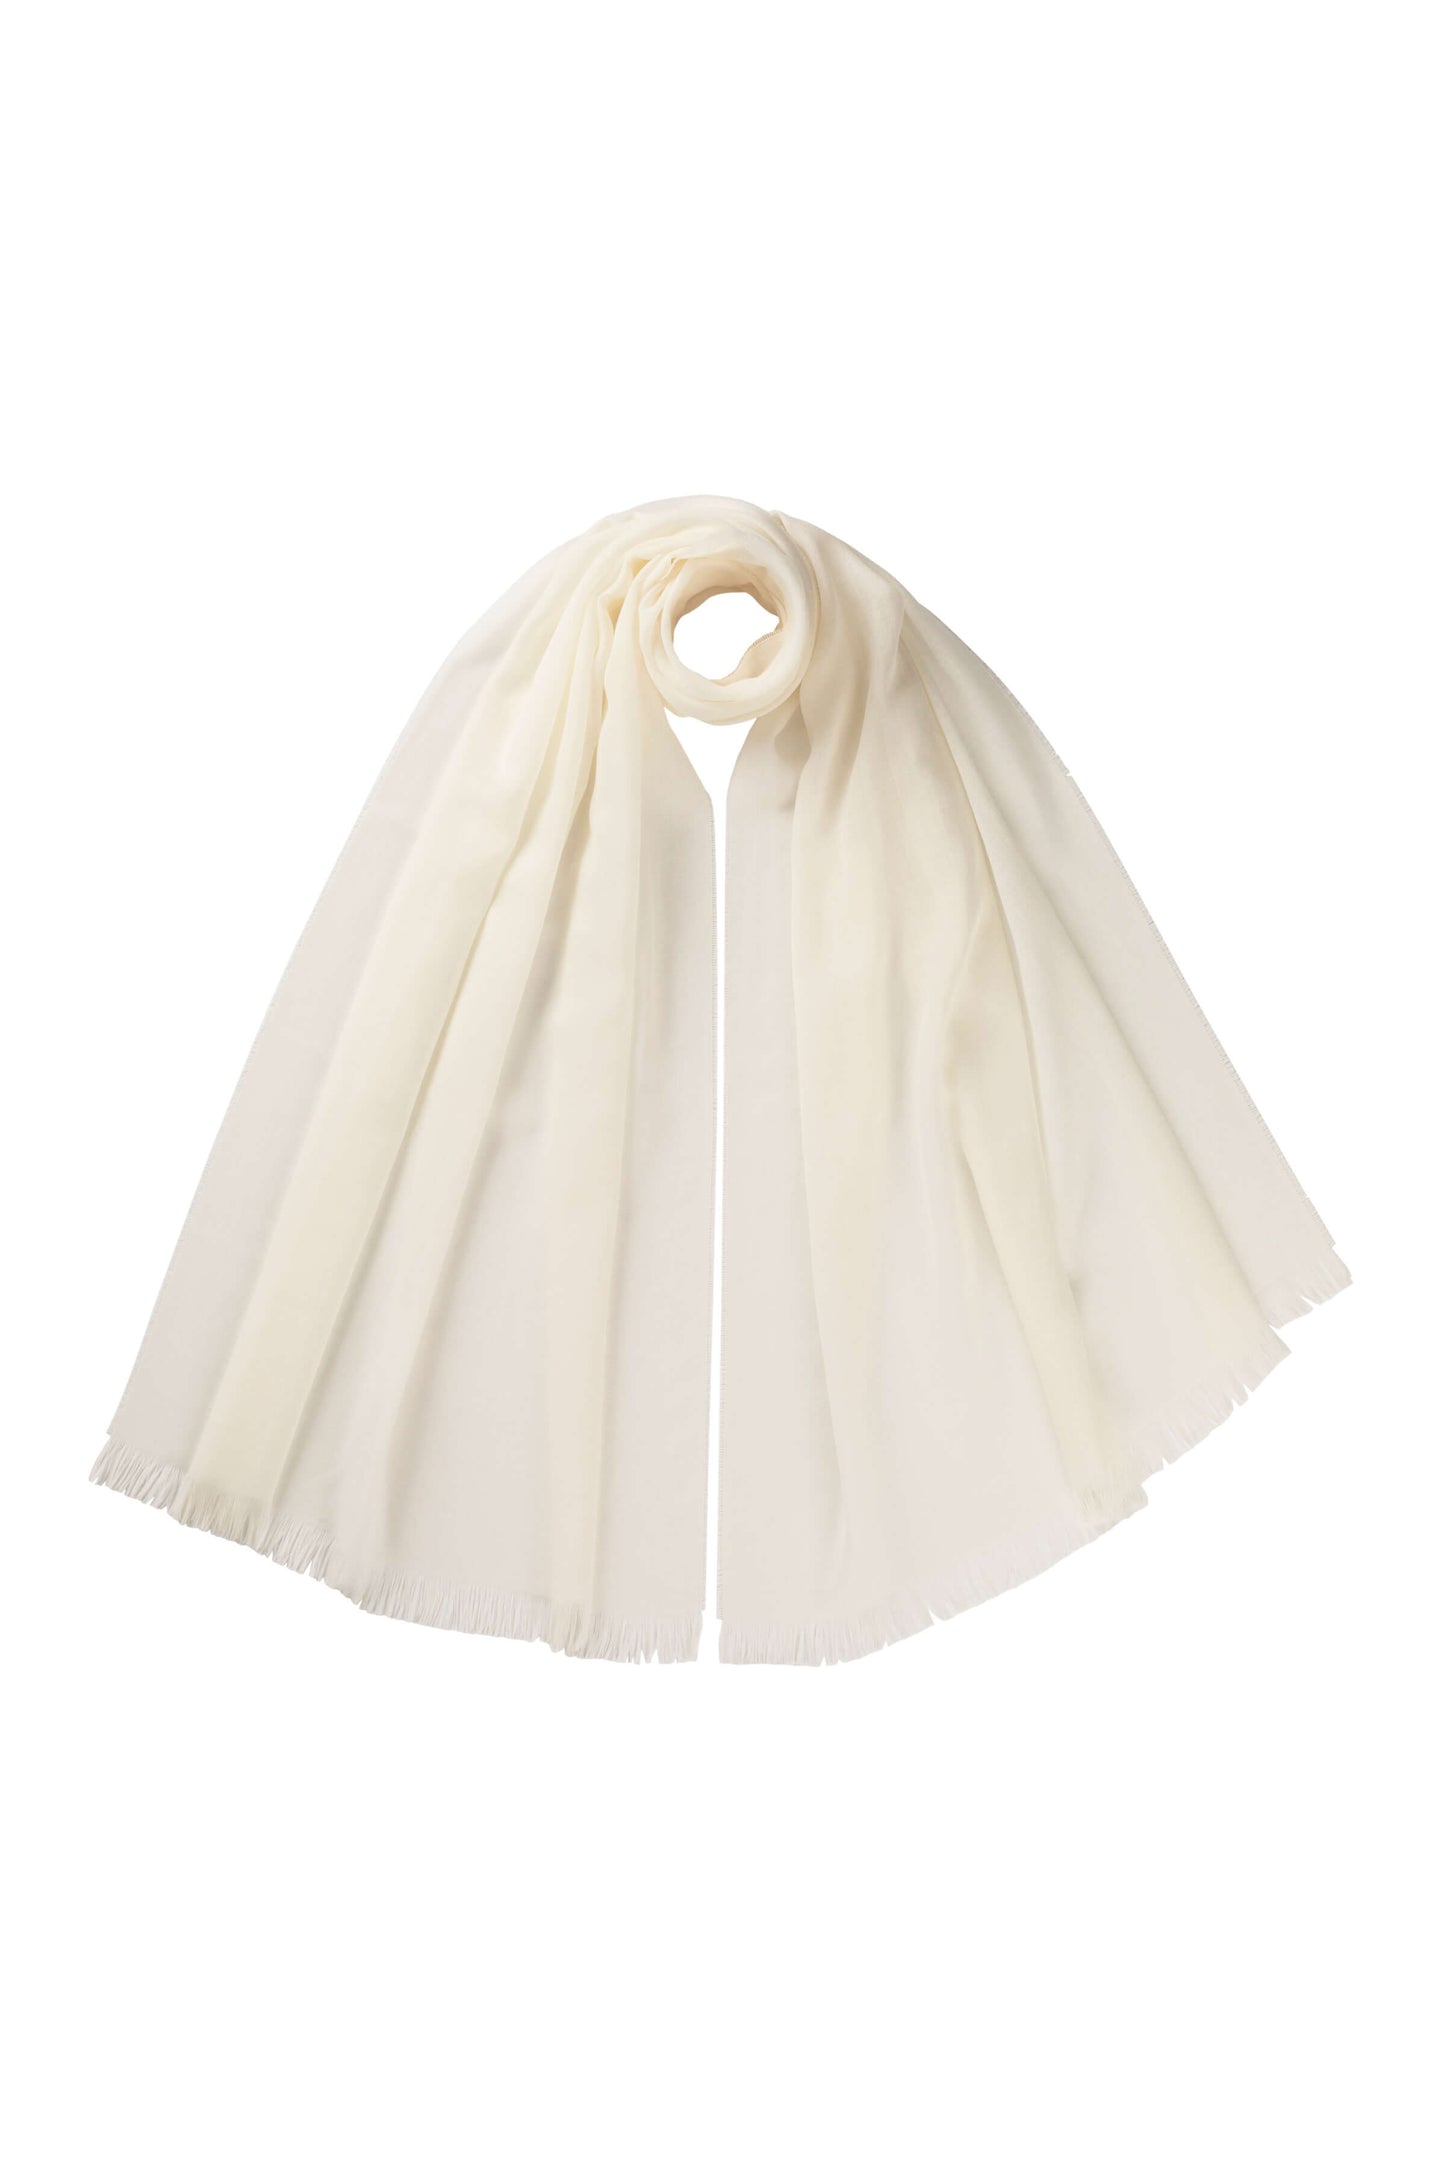 Johnstons of Elgin Lightweight Merino Wool Scarf in White shown on white background WD001093SA0000